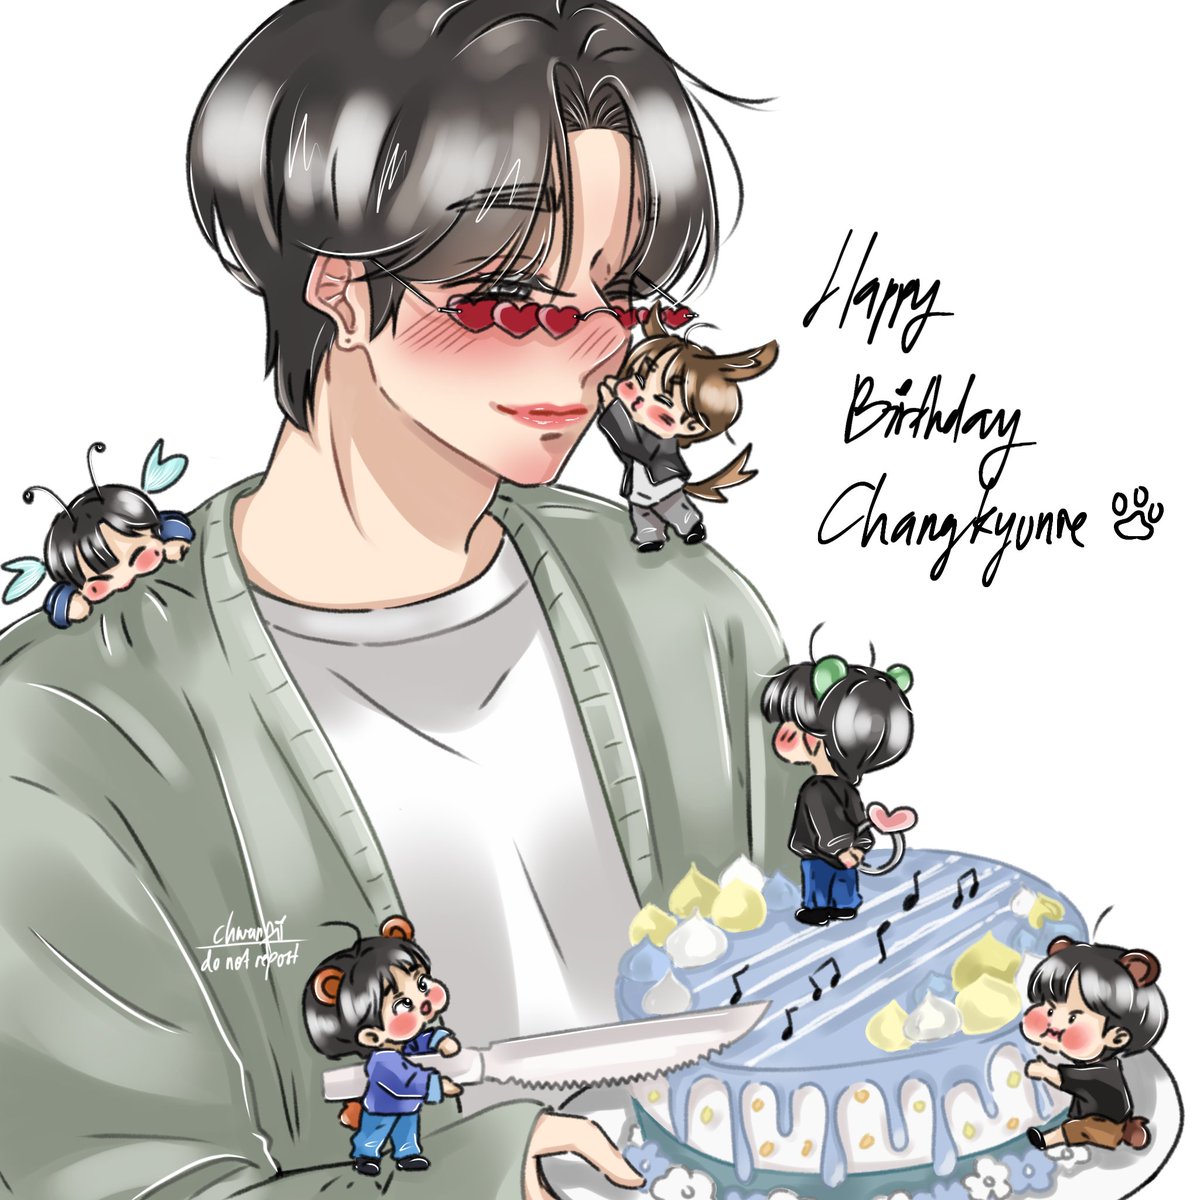 This is my Changkyun bday fanart that i couldn't finish it on time last year :( guess i rly changed my artstyle, i like this artstyle more though(⁠ ⁠･ั⁠﹏⁠･ั⁠) 

Once again, Happy birthday my love🫶
#HBDtoIM 
#꾹꾹눌러담아서축하합니다_IM데이